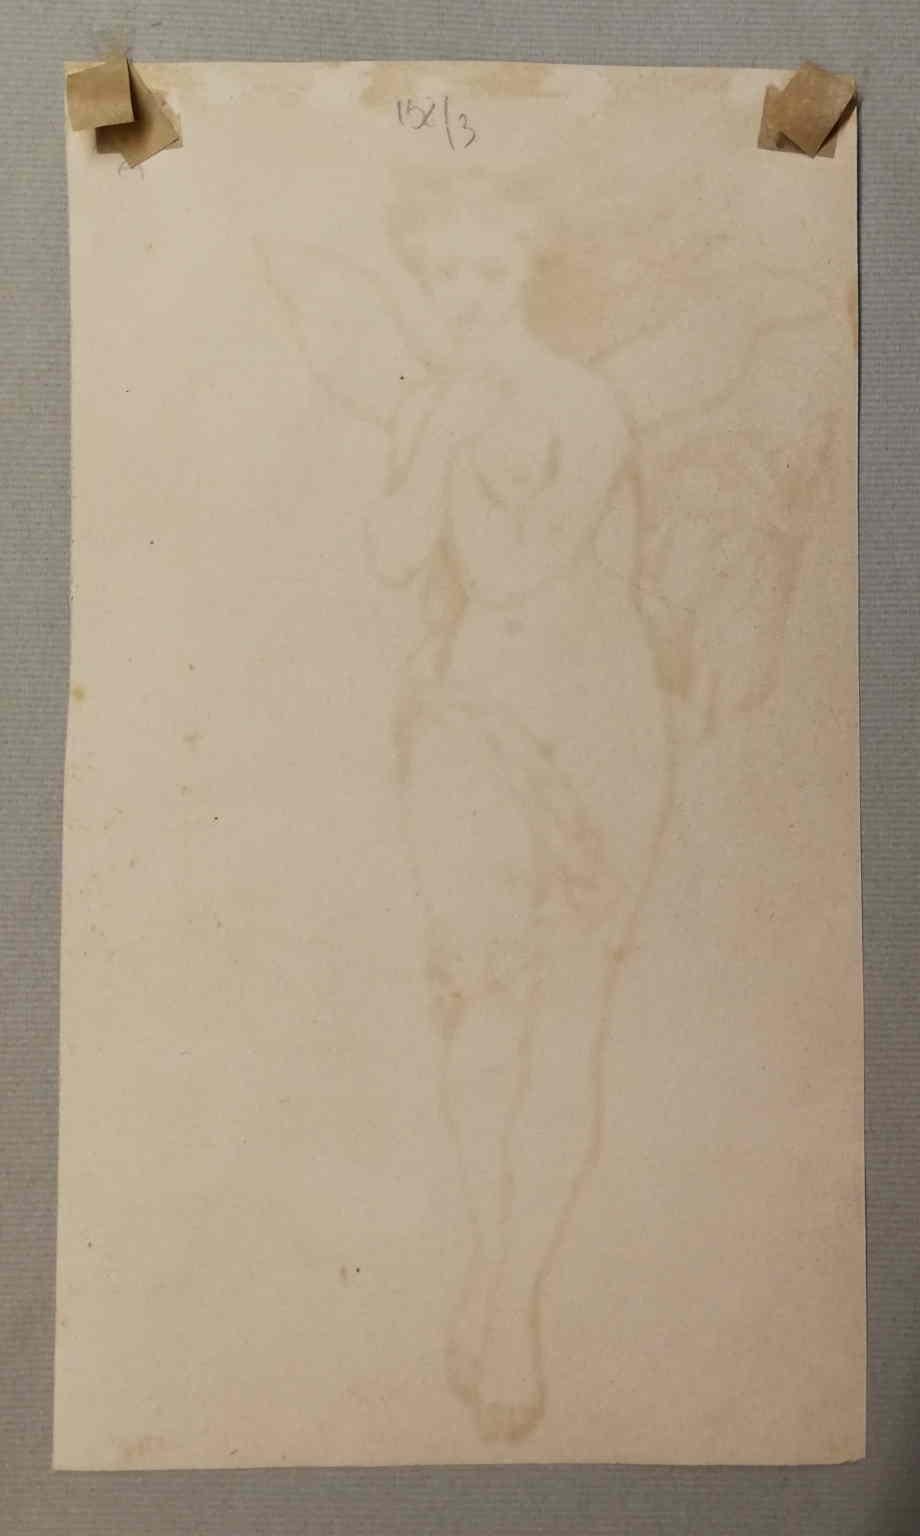 Giuseppe Calì, Psyche, end 19th-early 20th, ink on paper, signed 7